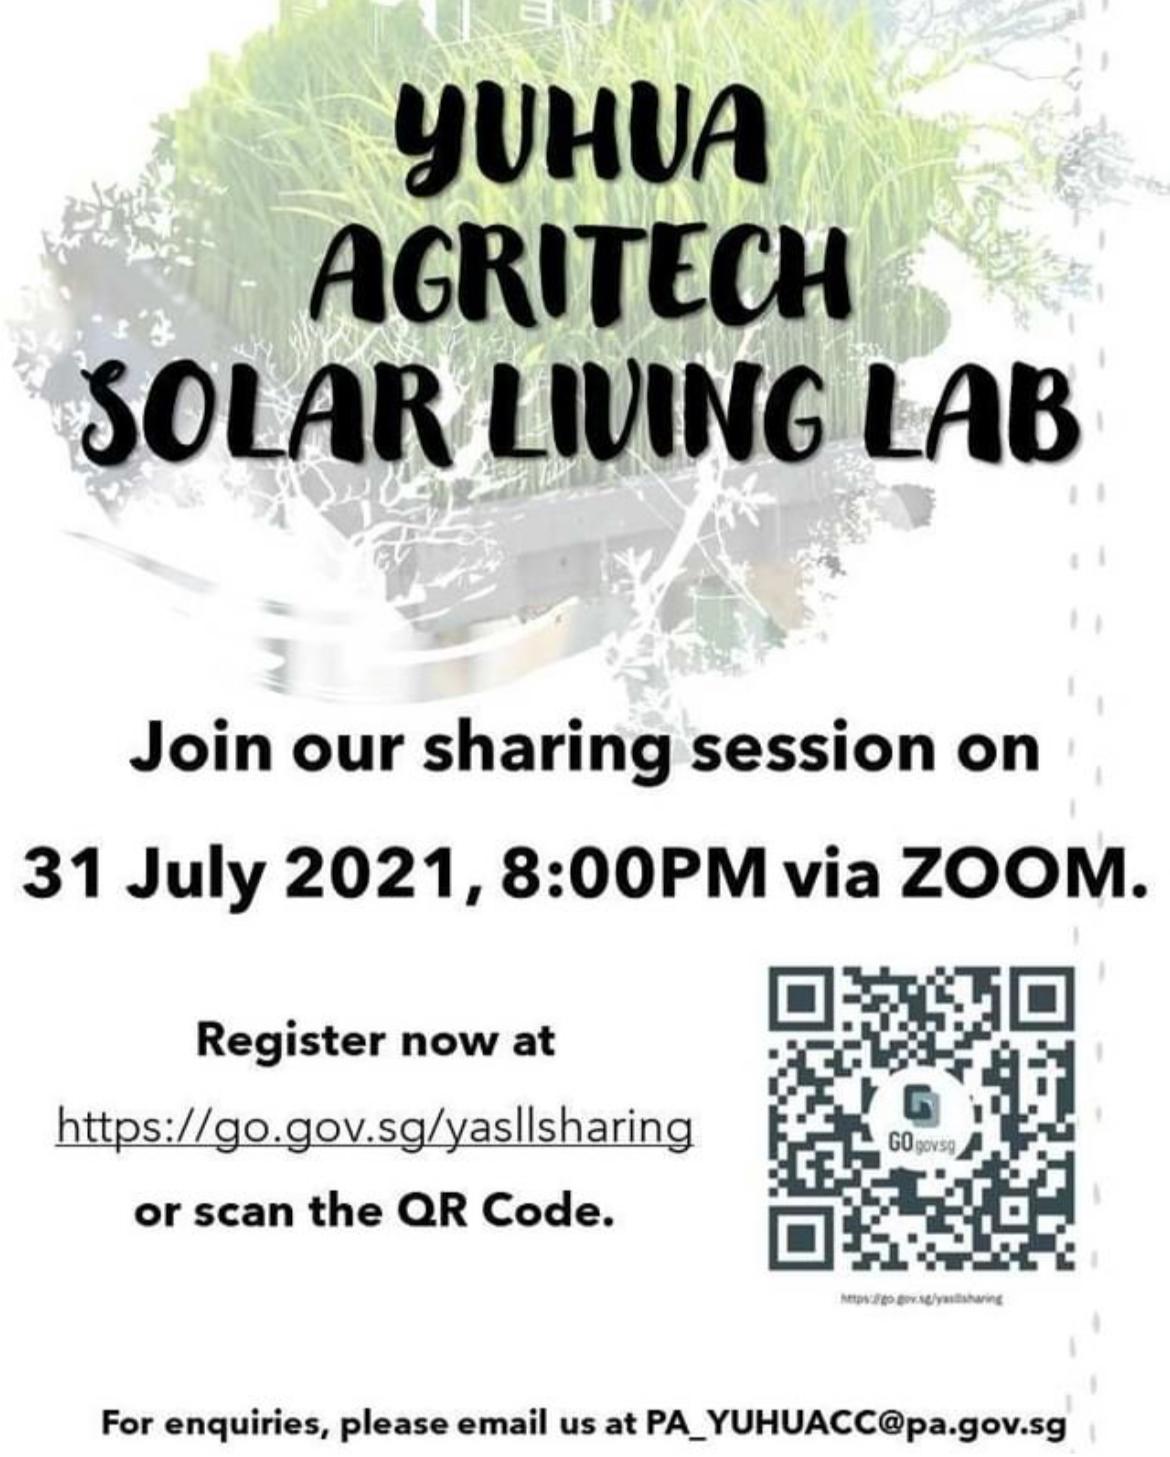 Zoom Sharing Session on Yuhua Agritech Solar Living Lab